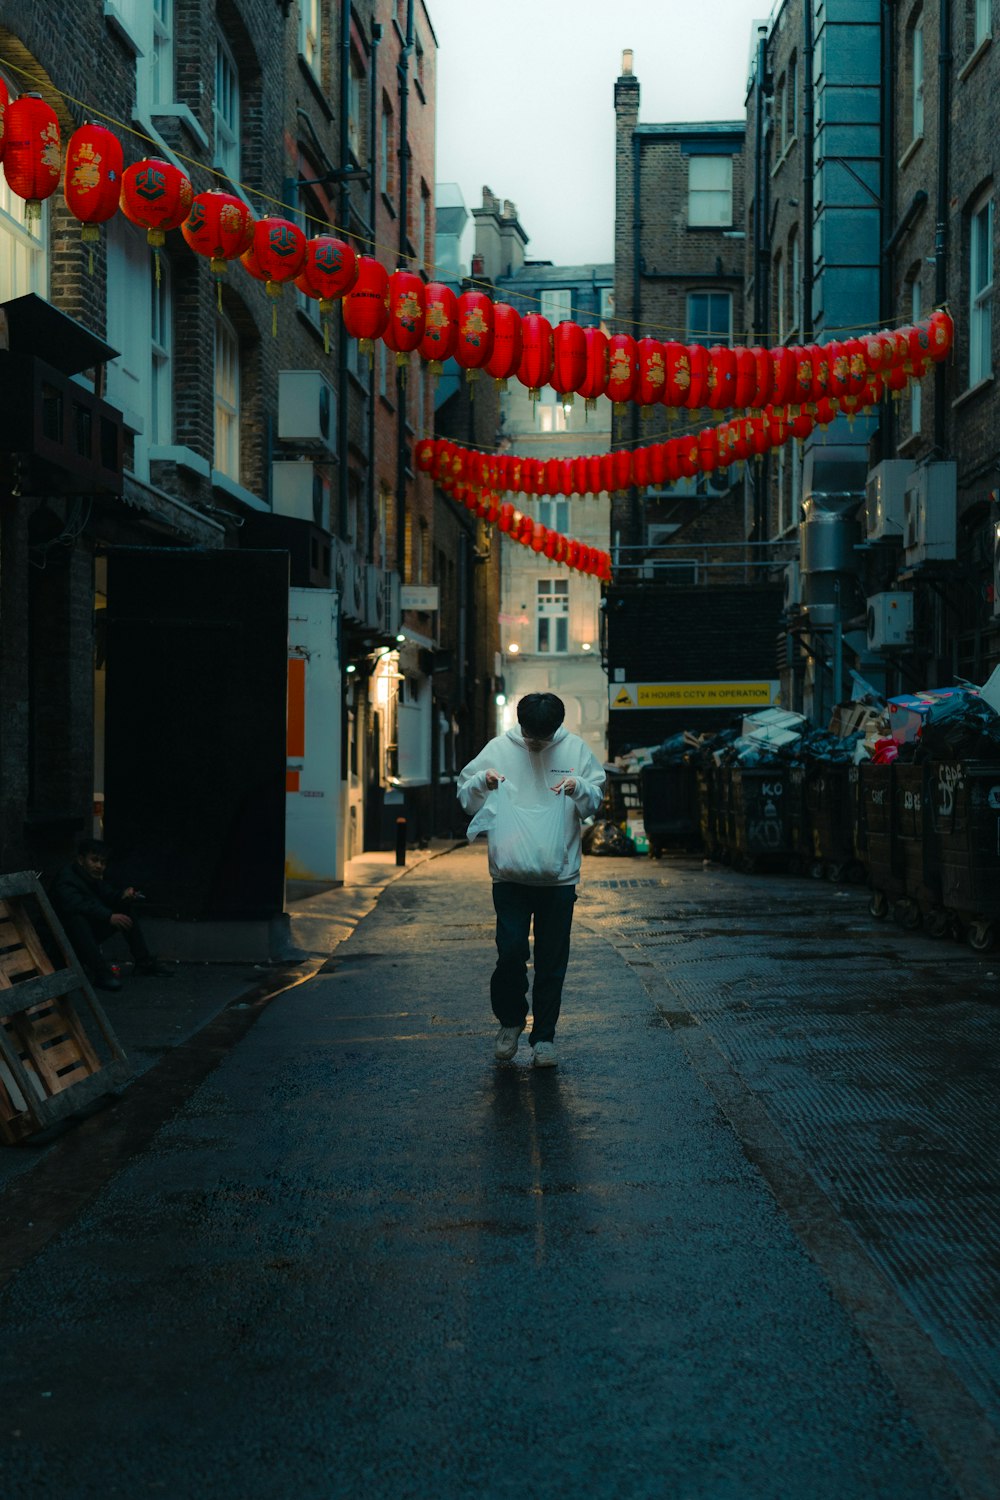 a person walking down a street with red decorations